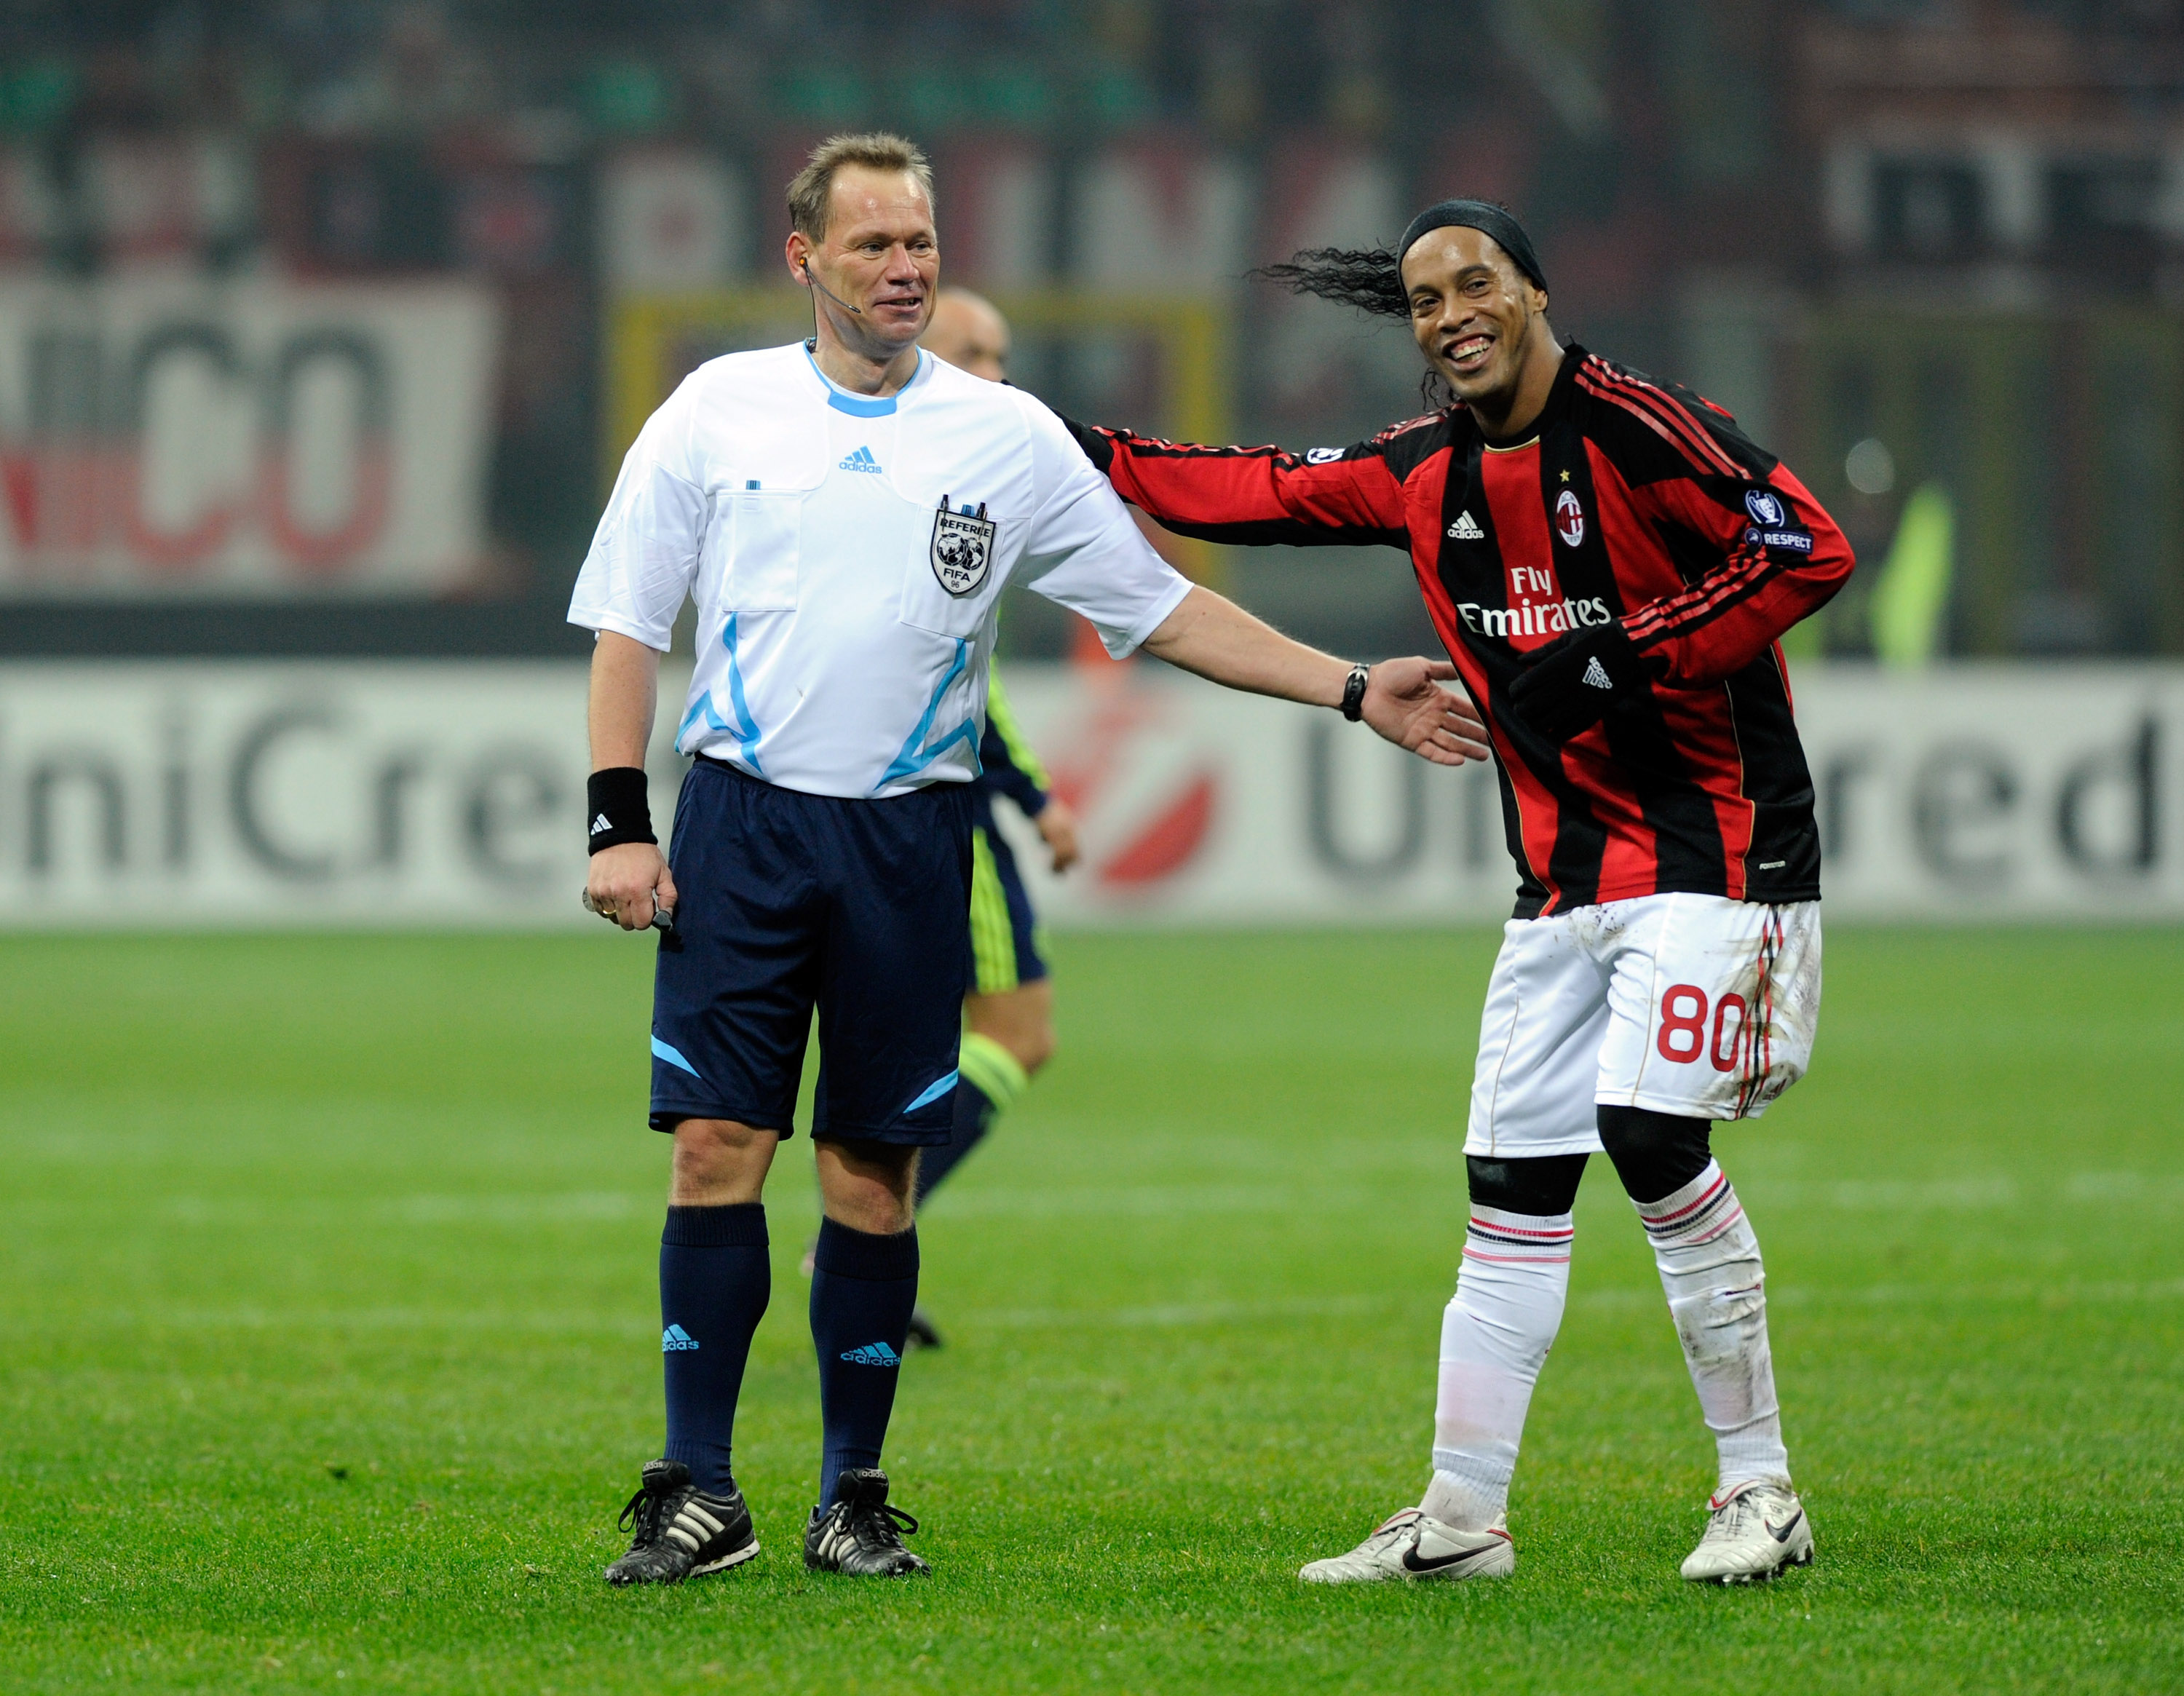 MILAN, ITALY - DECEMBER 08:  Referee Claus Bo Larsen and Ronaldinho of AC Milan during the UEFA Champions League Group G match between AC Milan and AFC Ajax at Stadio Giuseppe Meazza on December 8, 2010 in Milan, Italy.  (Photo by Claudio Villa/Getty Imag